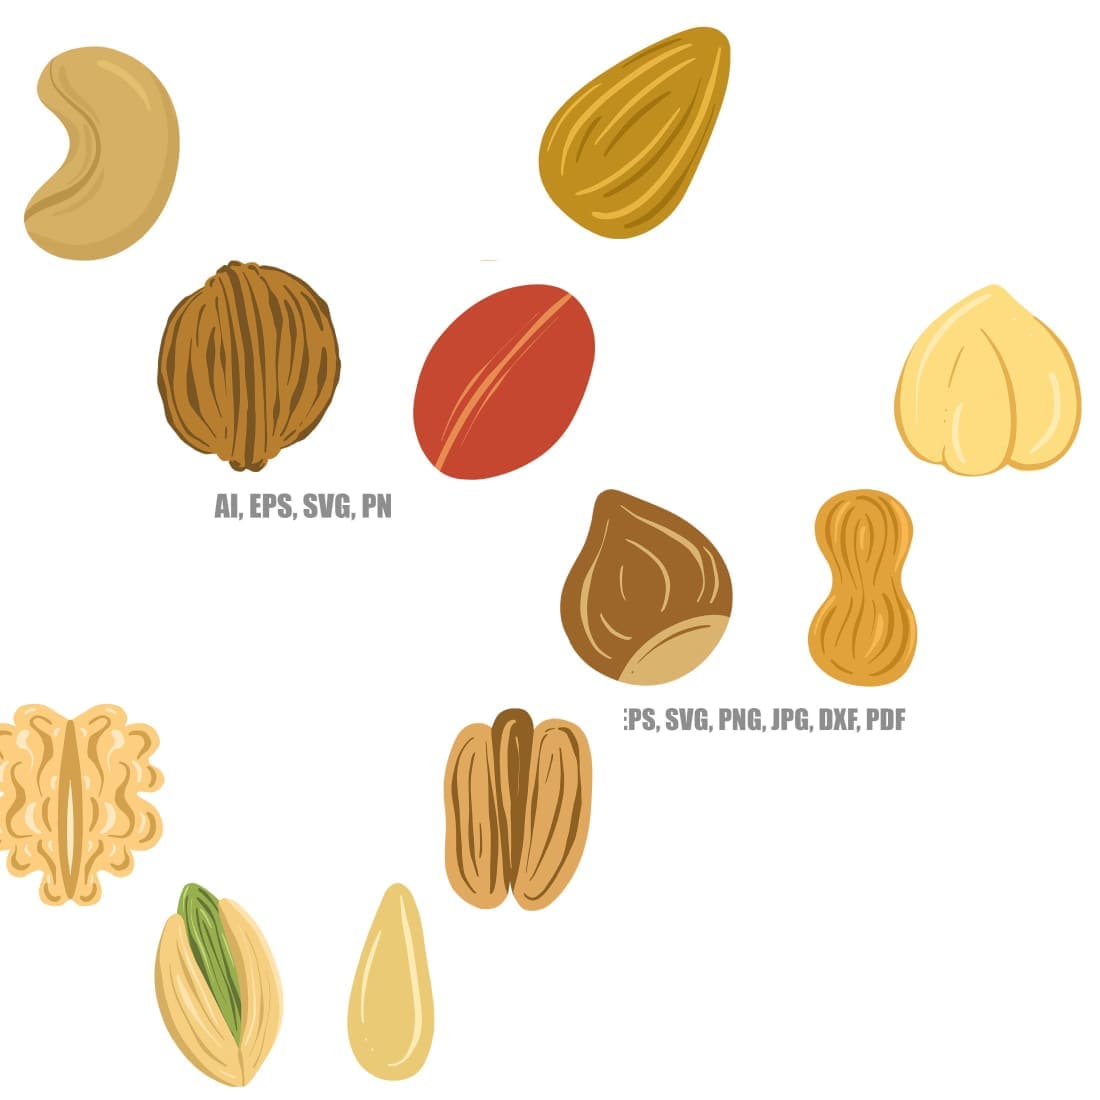 Second picture 1100x1100, collection nuts, seeds brazil walnut, cashew, pecan, almond.